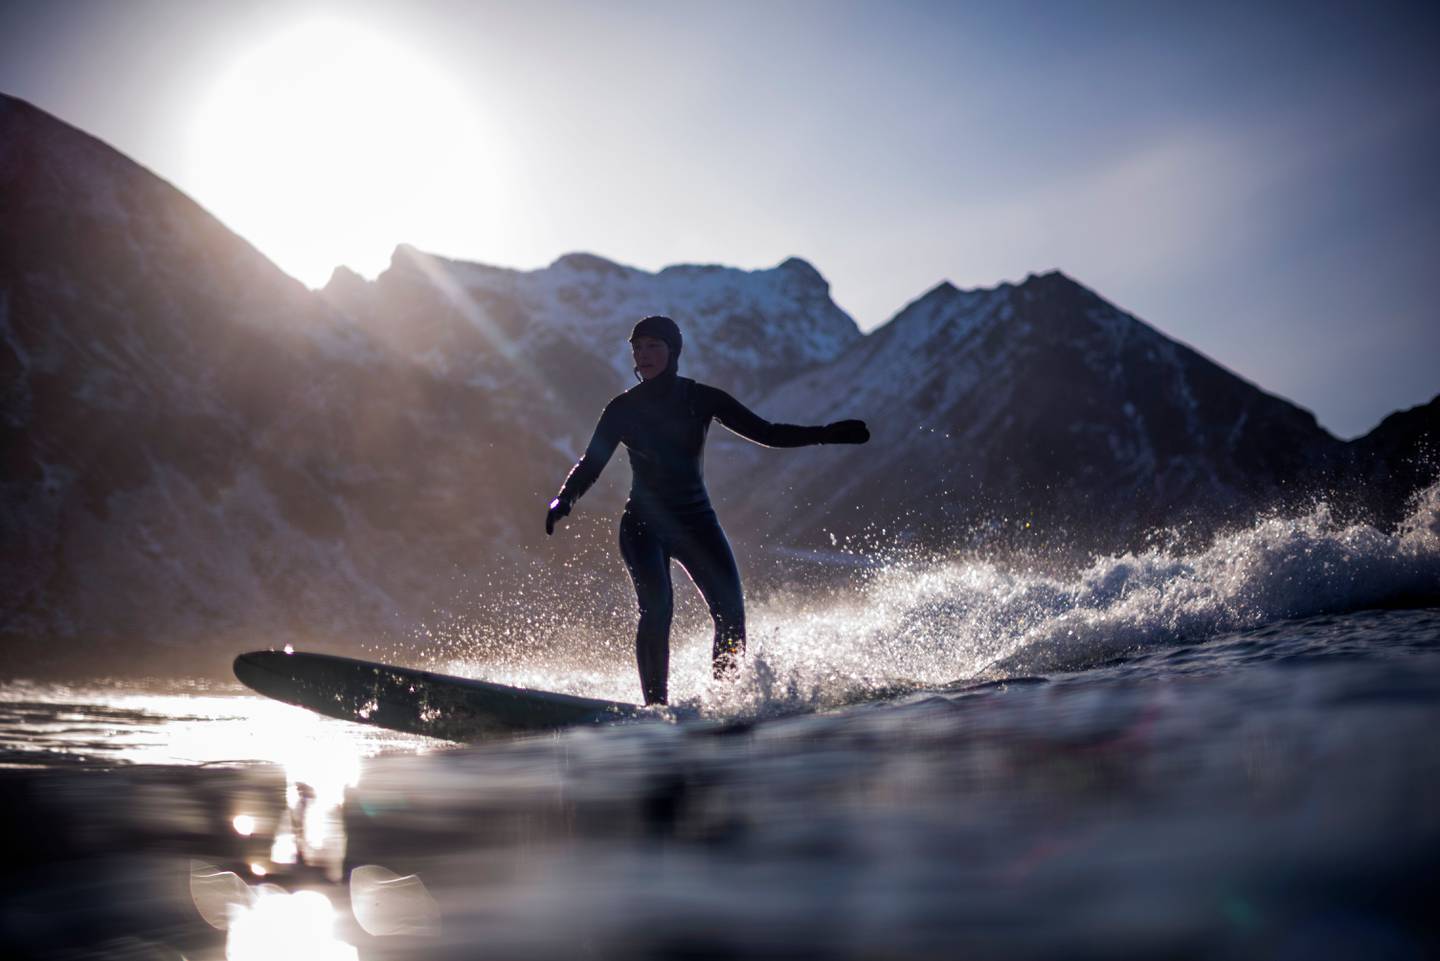 TOPSHOT - A surfer rides a wave on March 10, 2018 in Unstad, northern Norway, Lofoten islands, within the Arctic Circle as air temperature drops minus 13°C and water temperature above 4°C.  / AFP PHOTO / OLIVIER MORIN